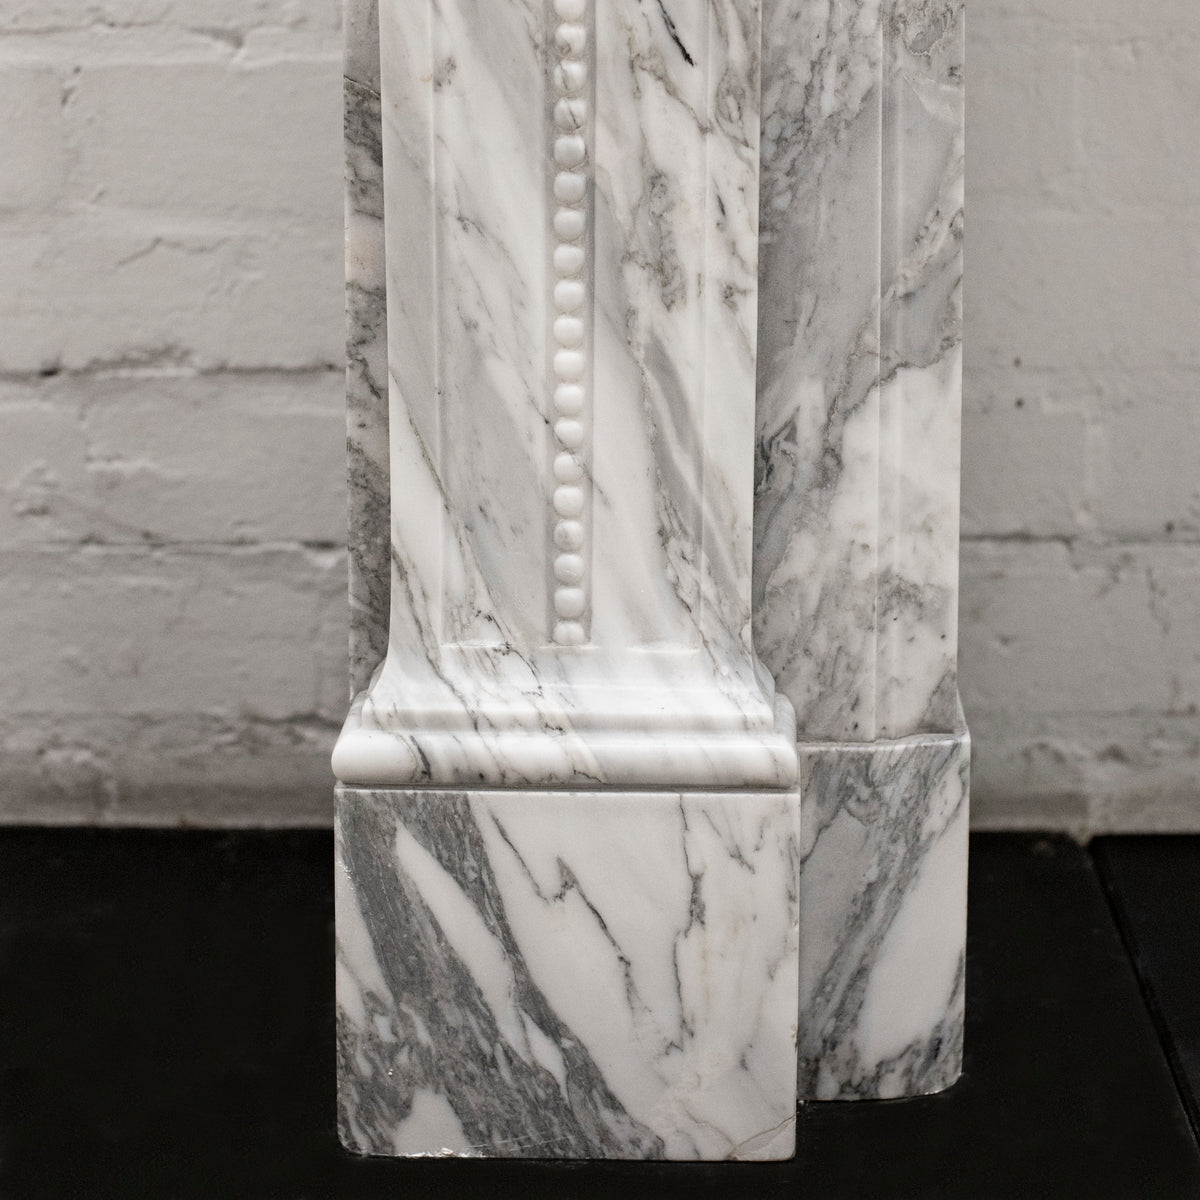 Louis XVI Style Italian Marble Fireplace in Arabescato Marble | The Architectural Forum